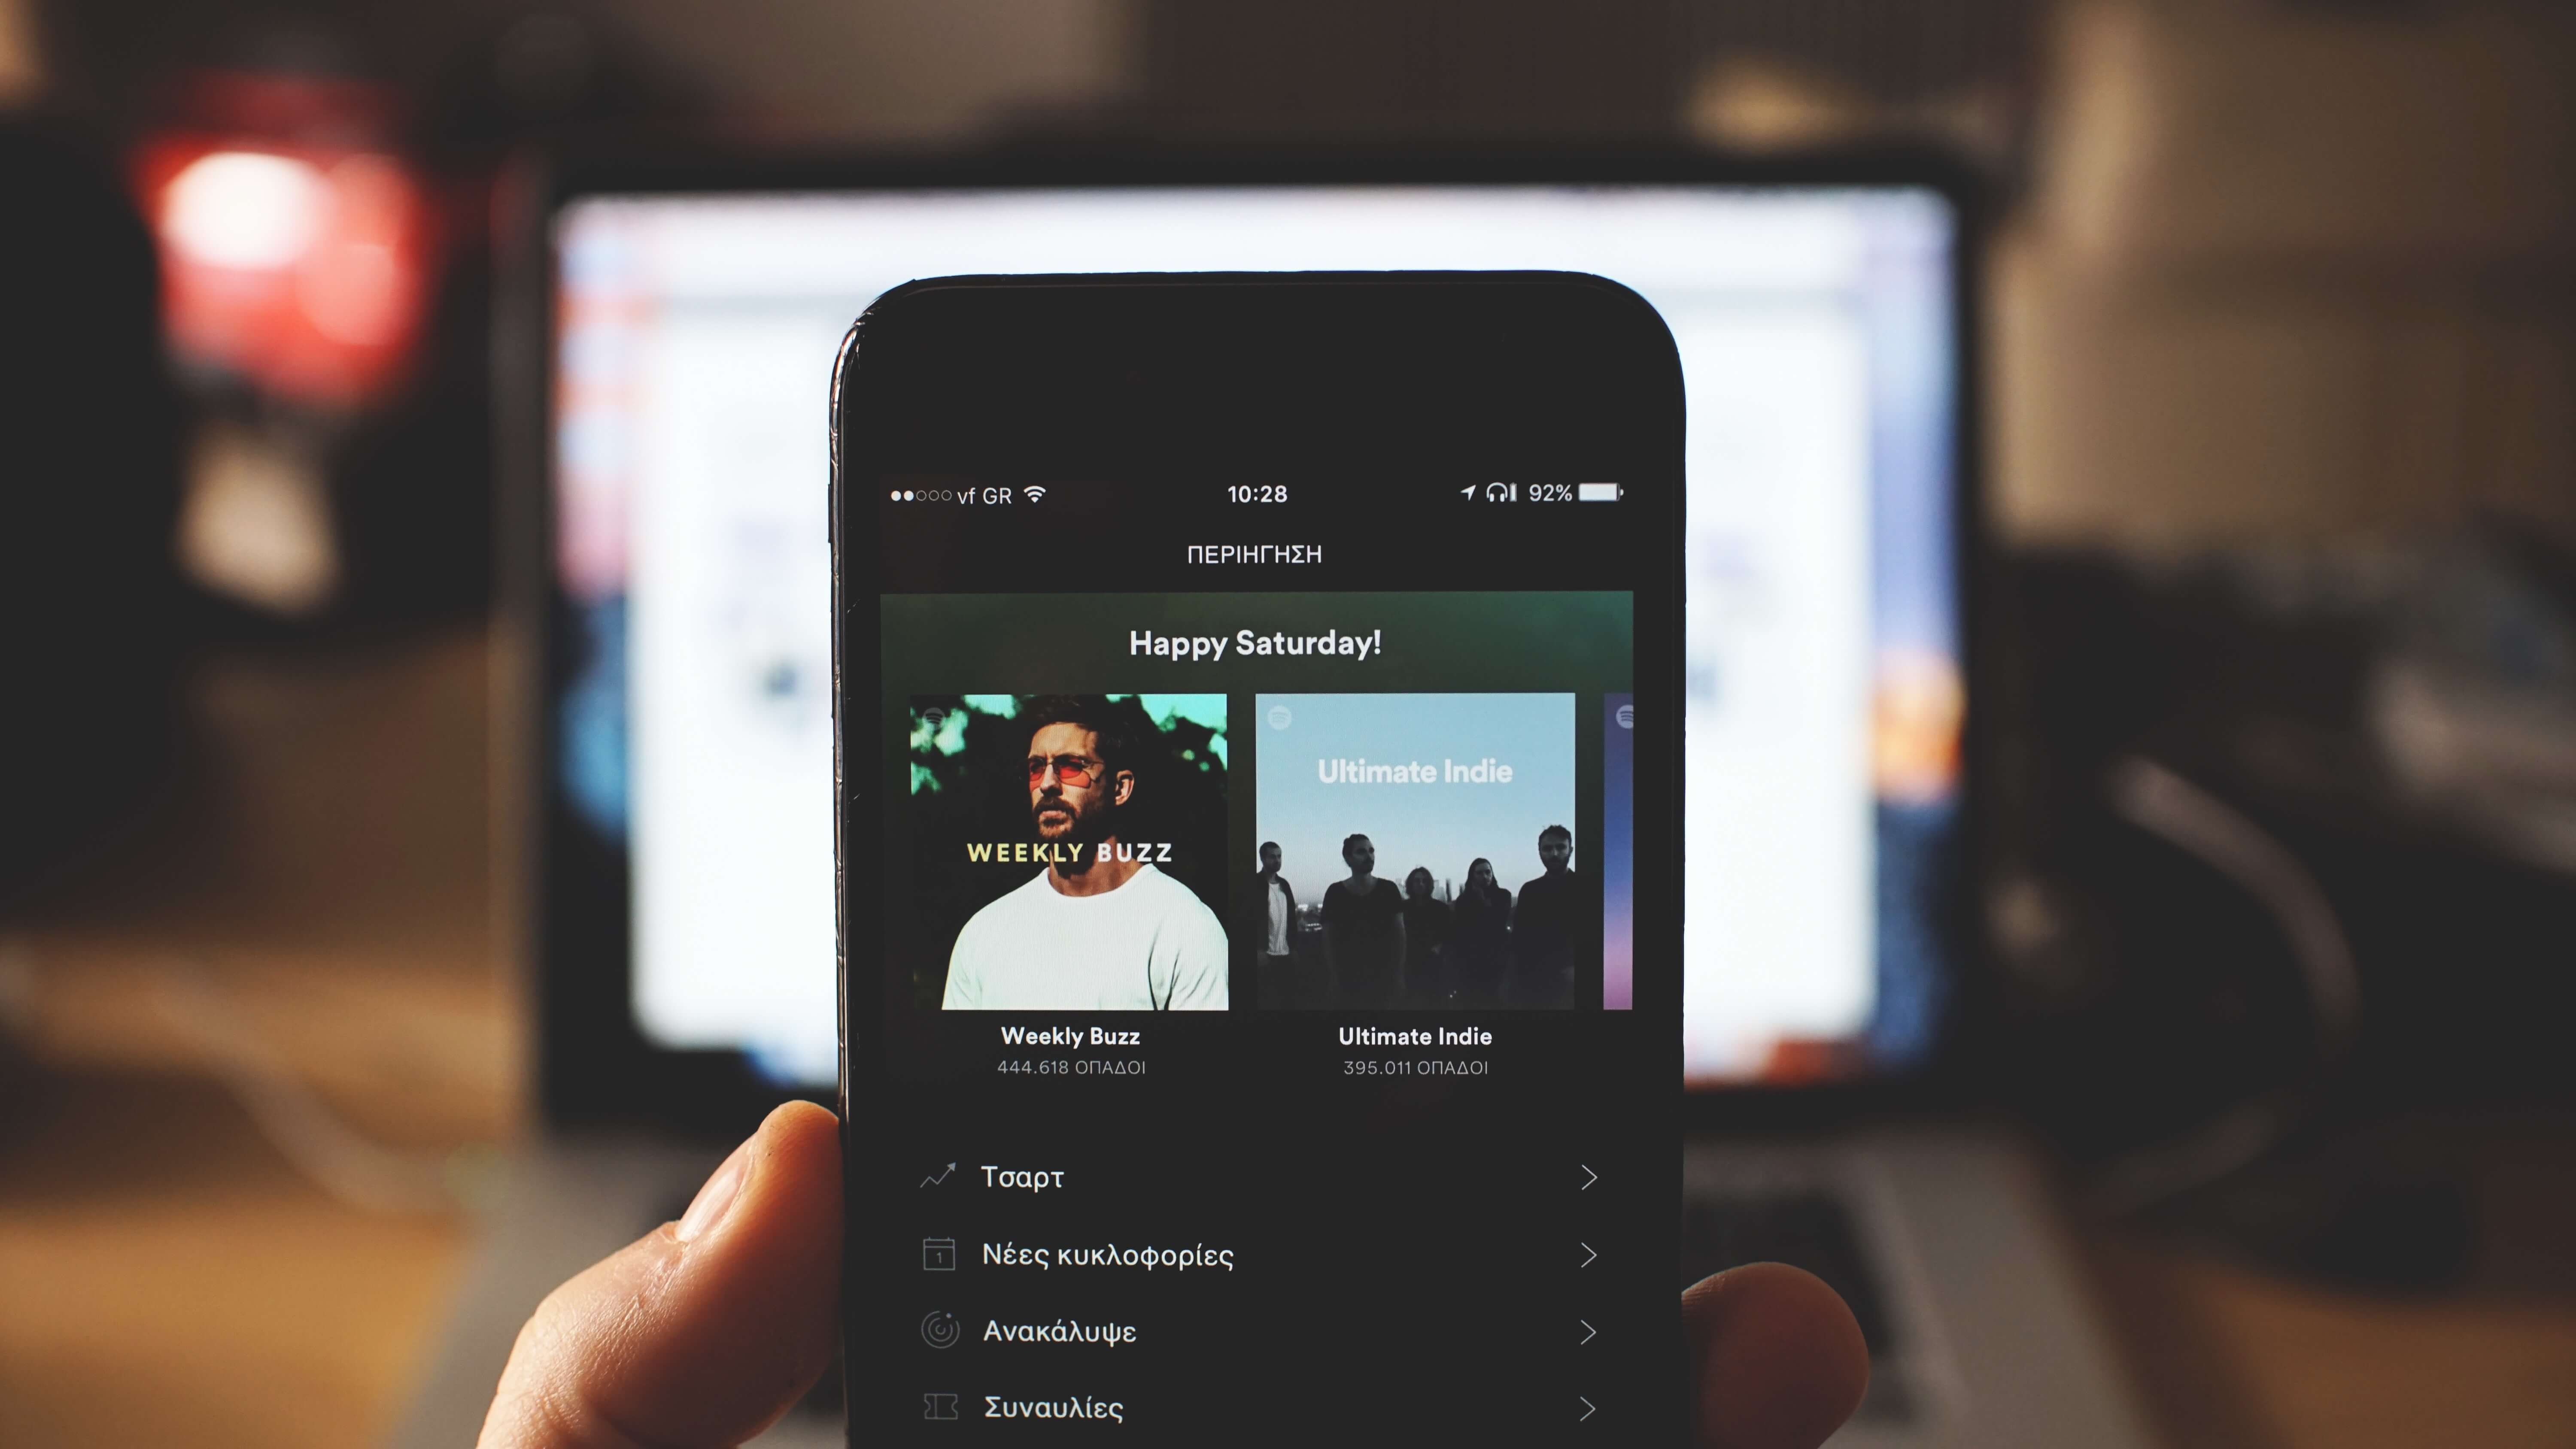 How To Crack Spotify On Iphone